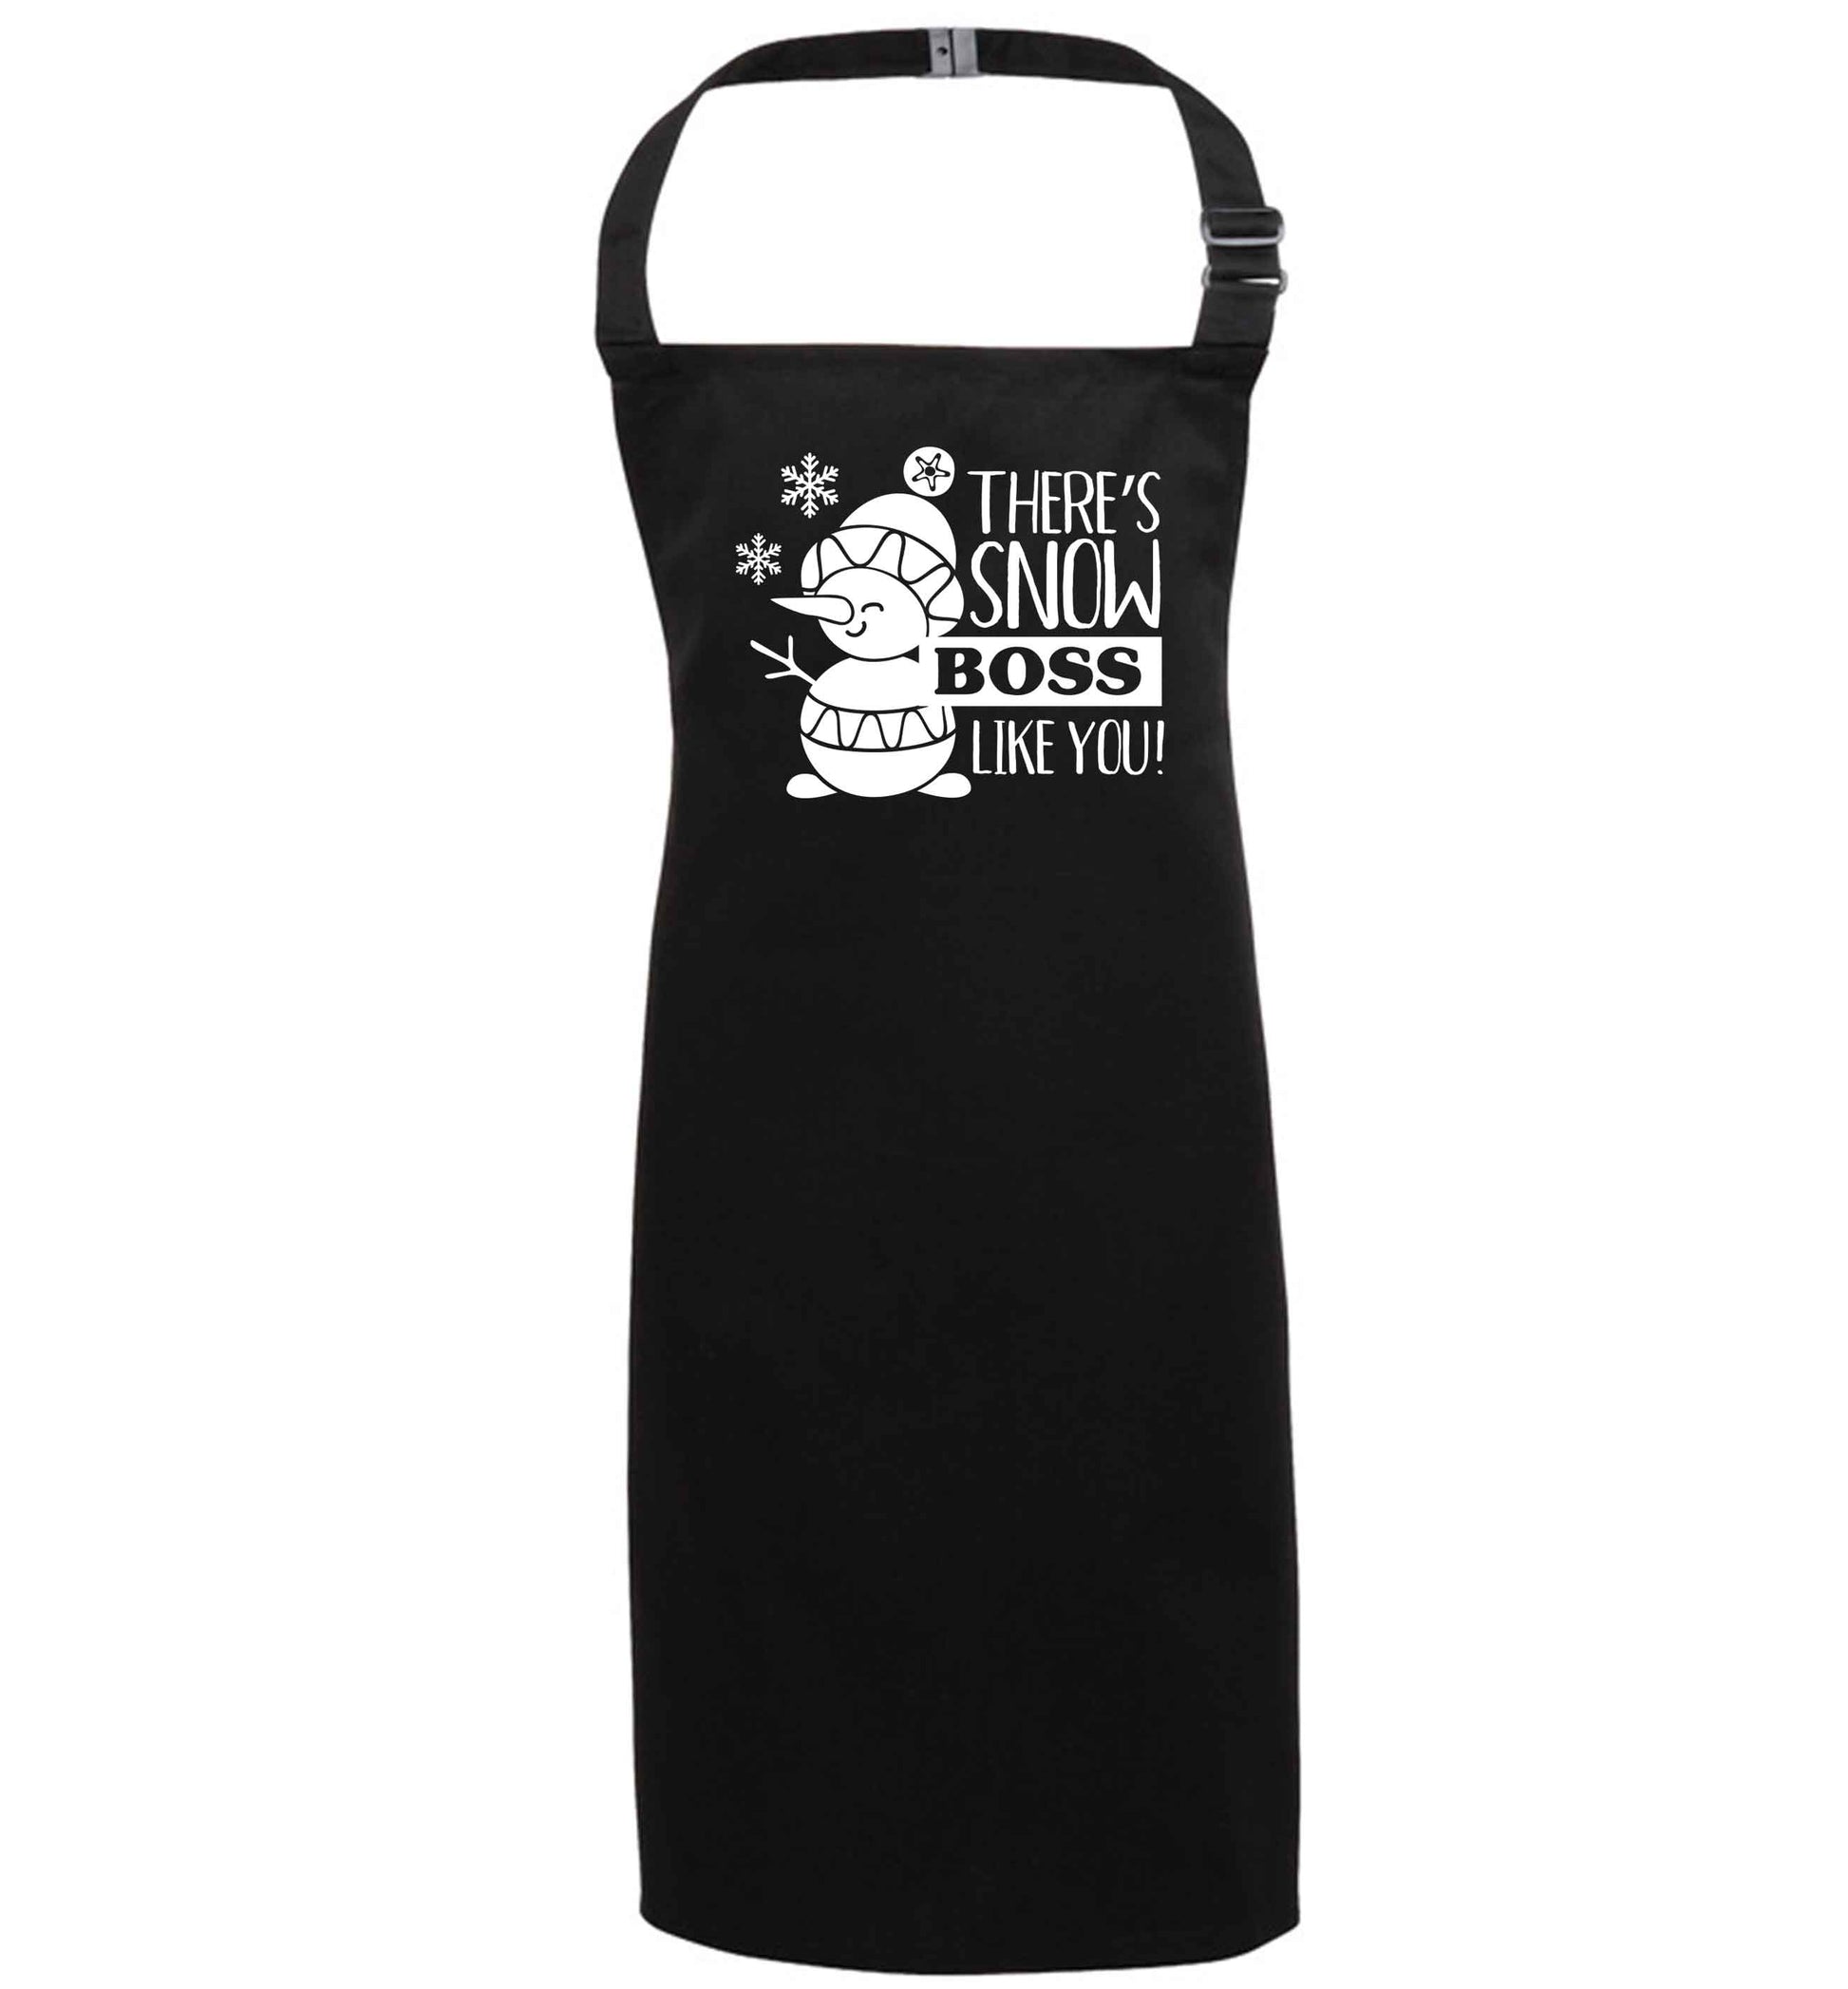 There's snow boss like you black apron 7-10 years